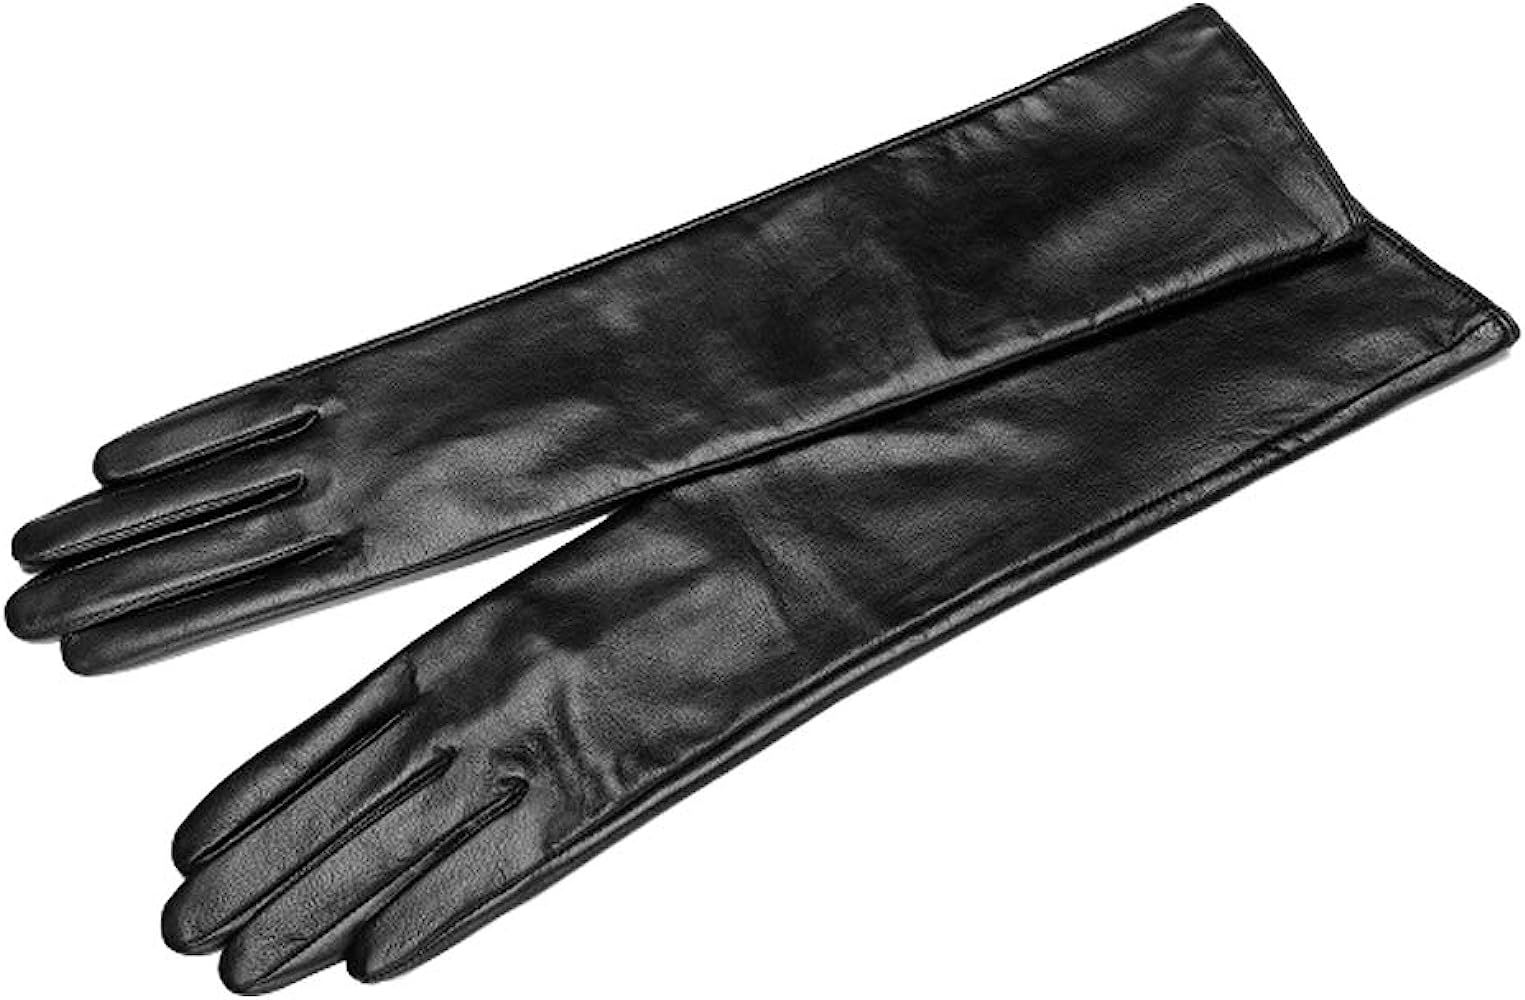 QECEPEI Womens Long Leather Gloves Winter Touchscreen Opera Evening Dress Driving Gloves | Amazon (US)